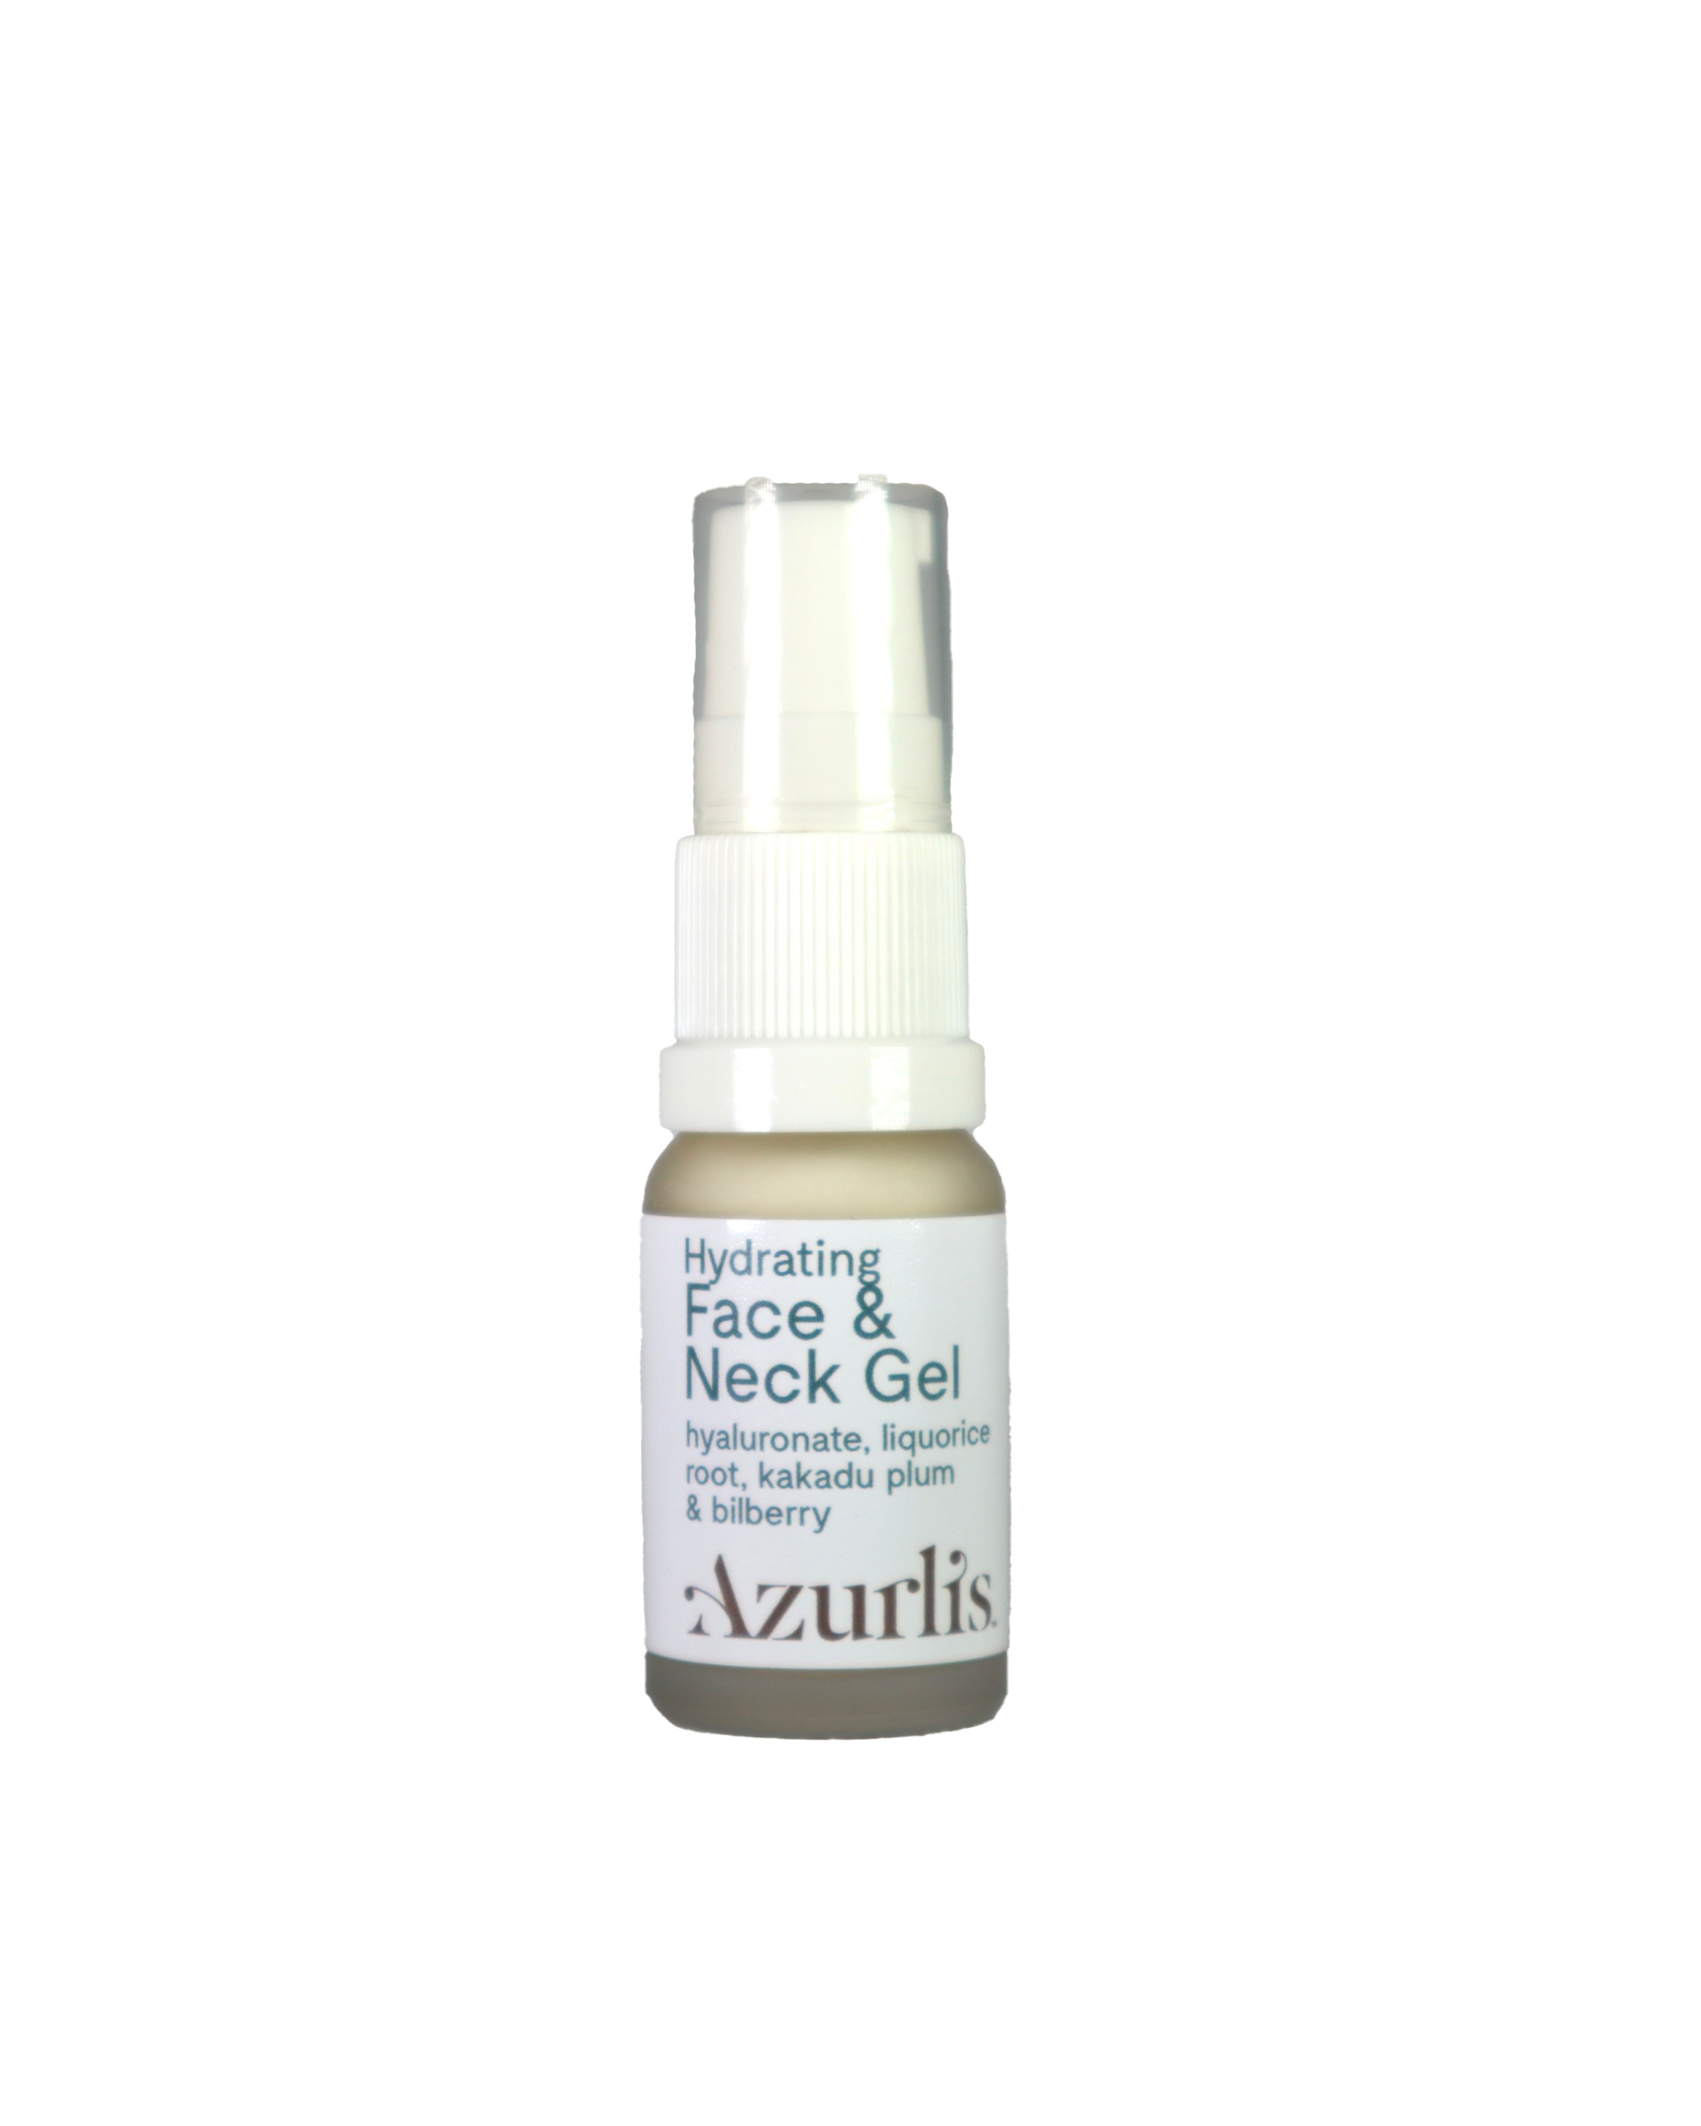 Azurlis™ Hydrating Face & Neck Gel - Serum 30ml is a real nourishing hydrating gel, cream, serum star product, superb for all skin types, to protect against premature ageing!